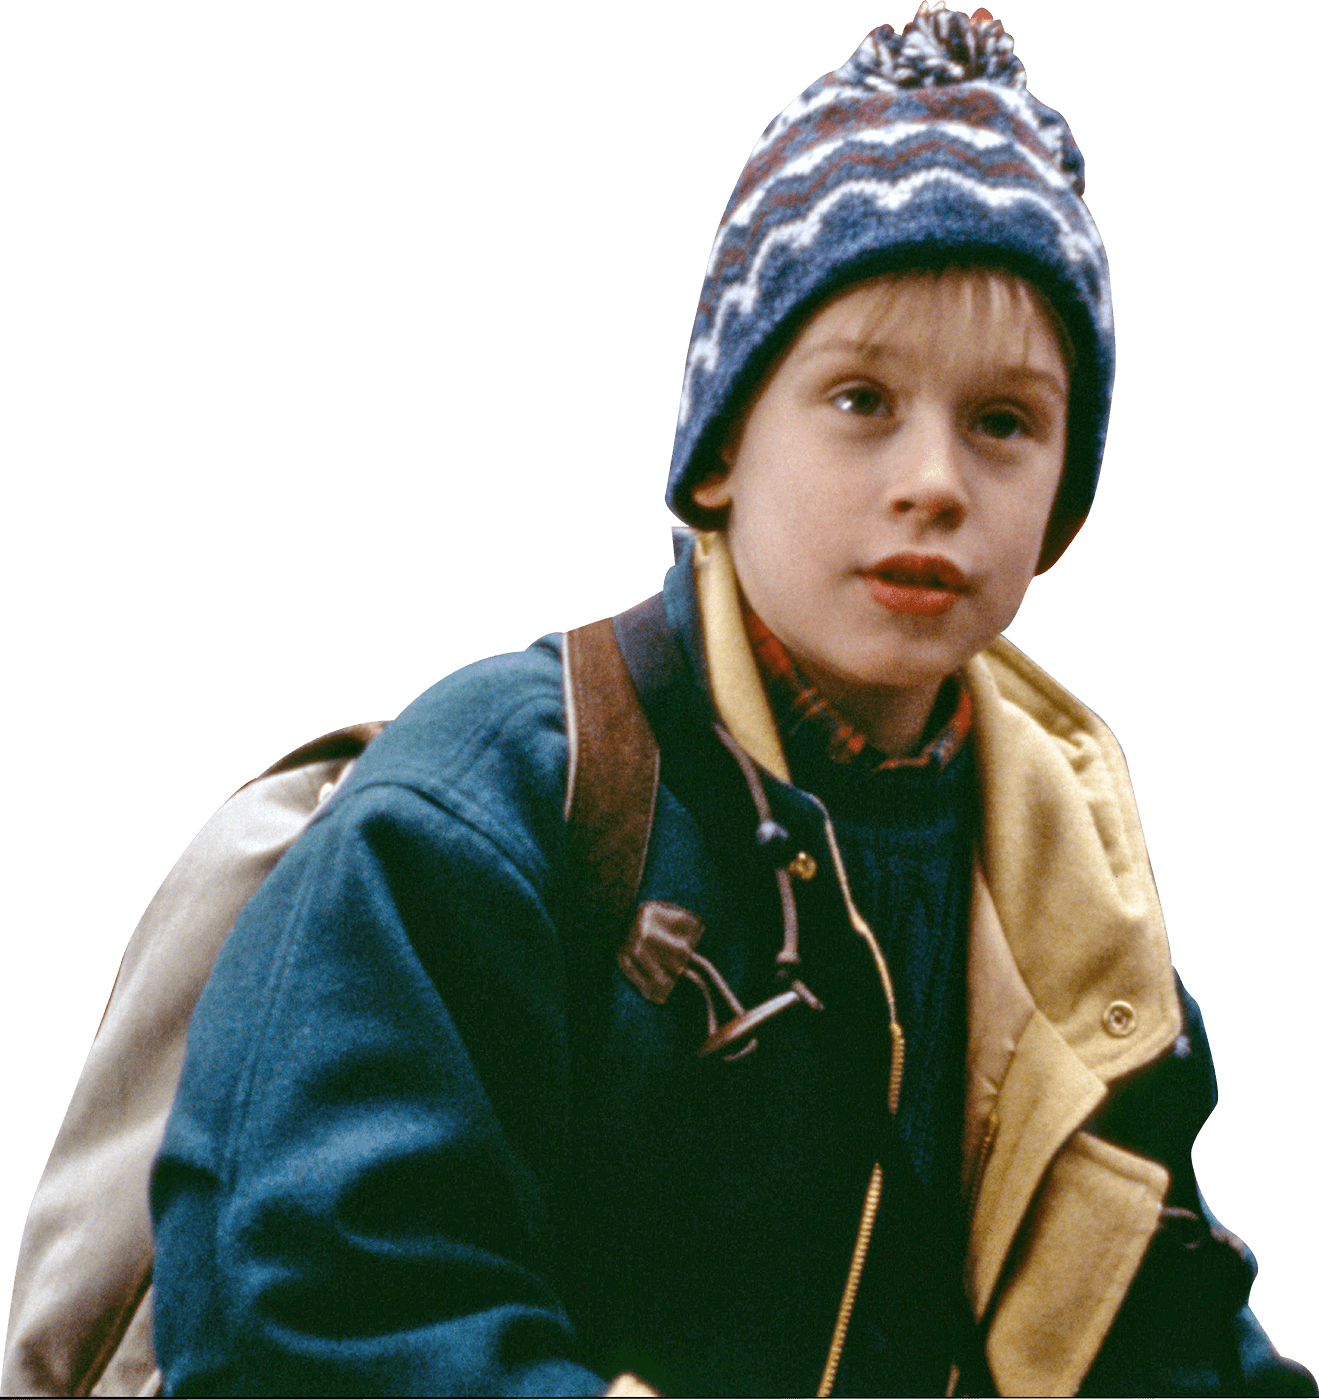 A Boy Wearing A Hat And Jacket